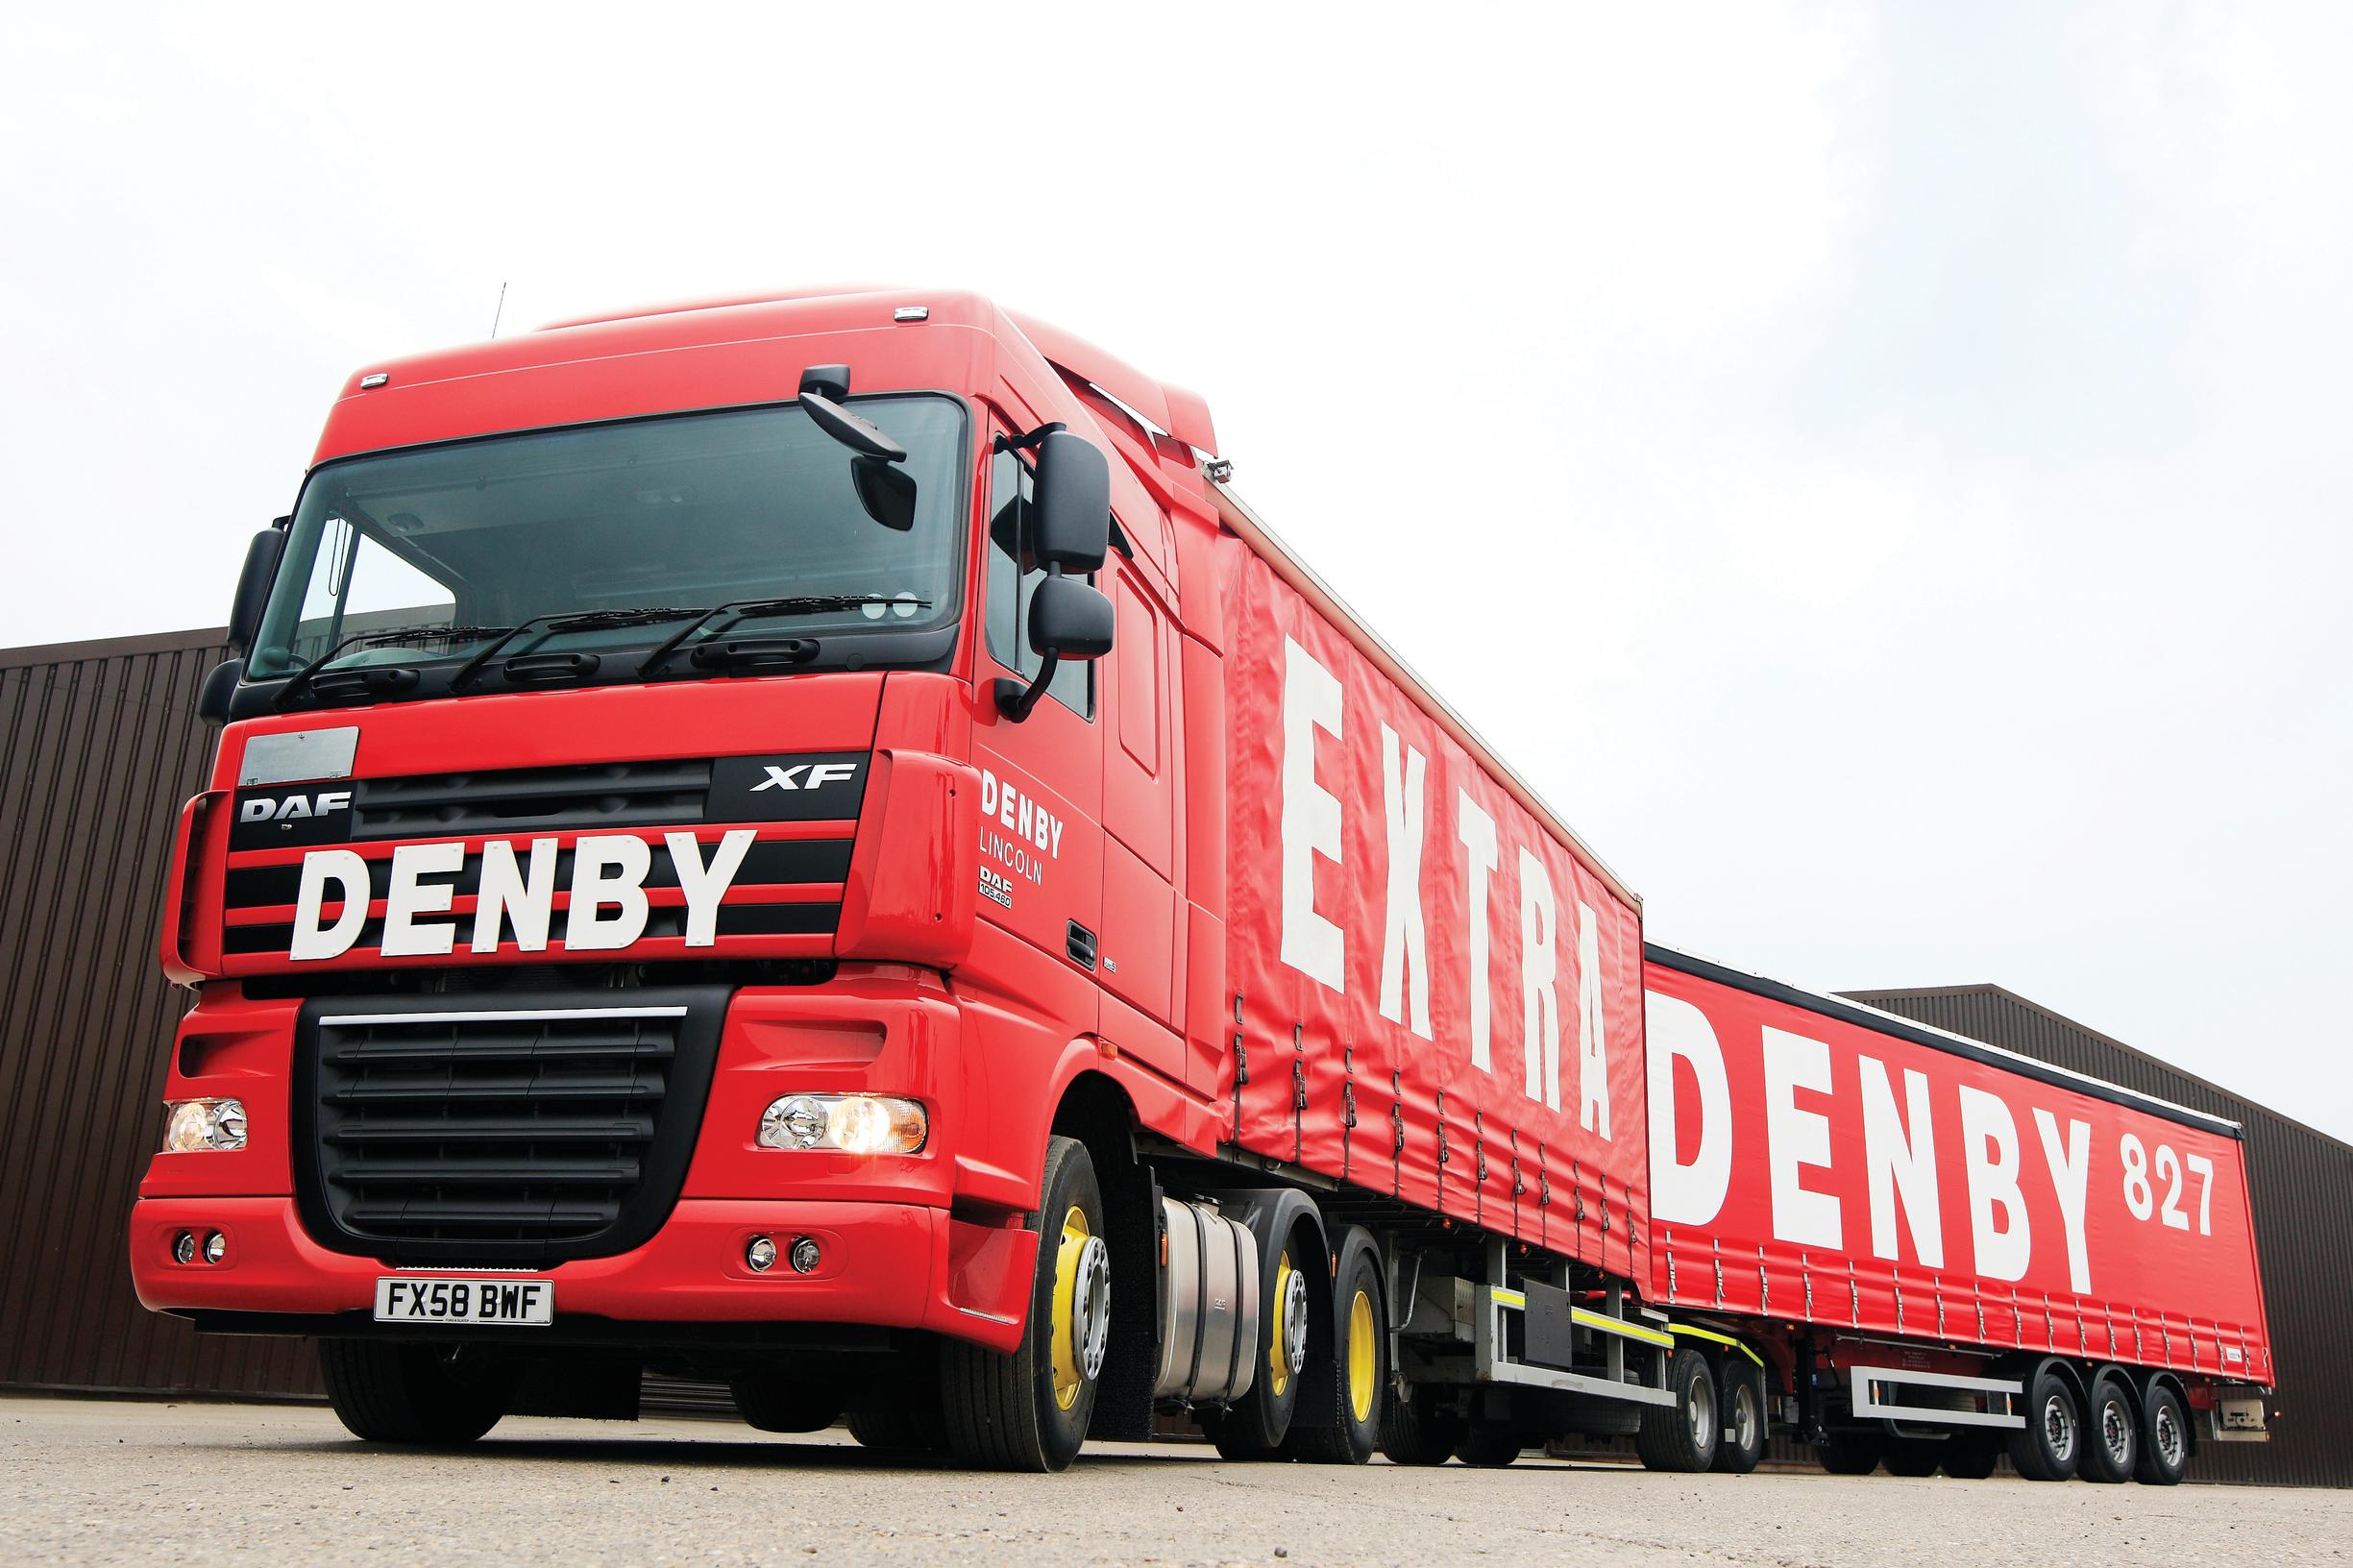 Denby’s 25.25 metre lorry, dubbed the Eco-Link